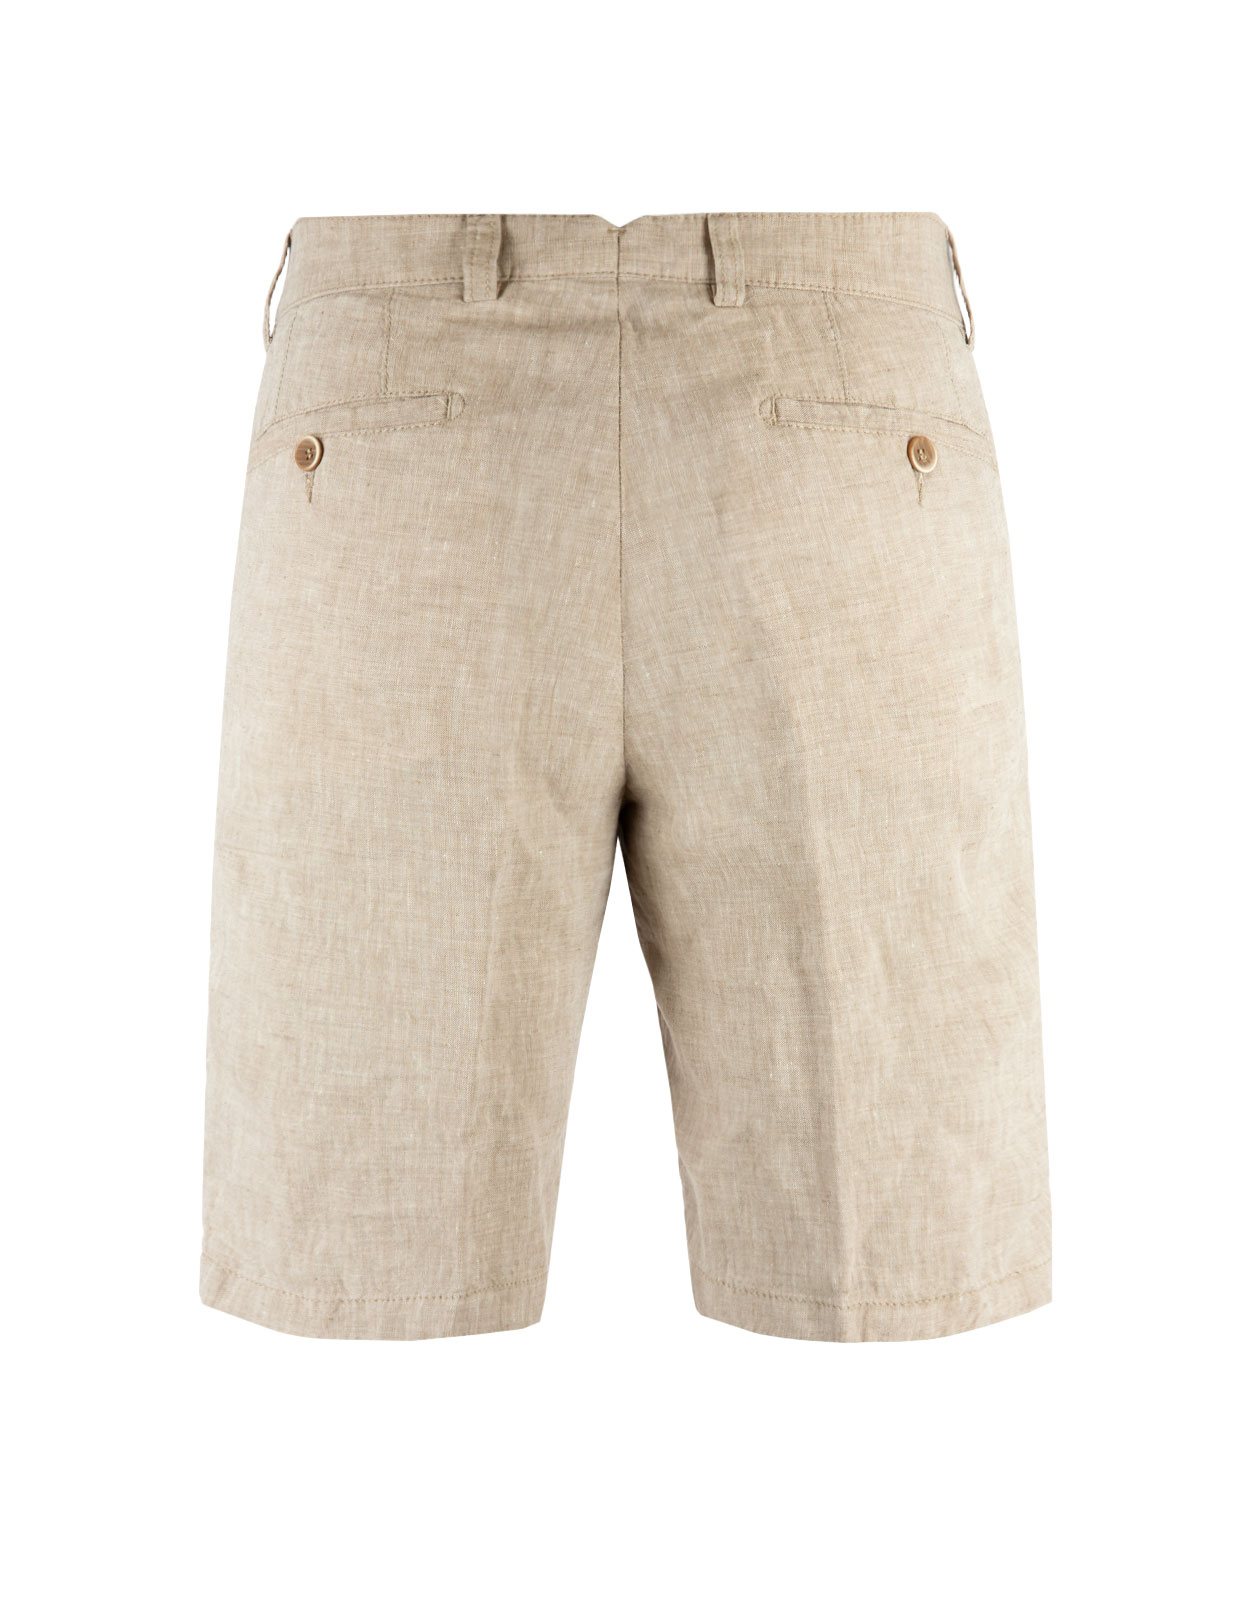 Ströms Shorts Taupe